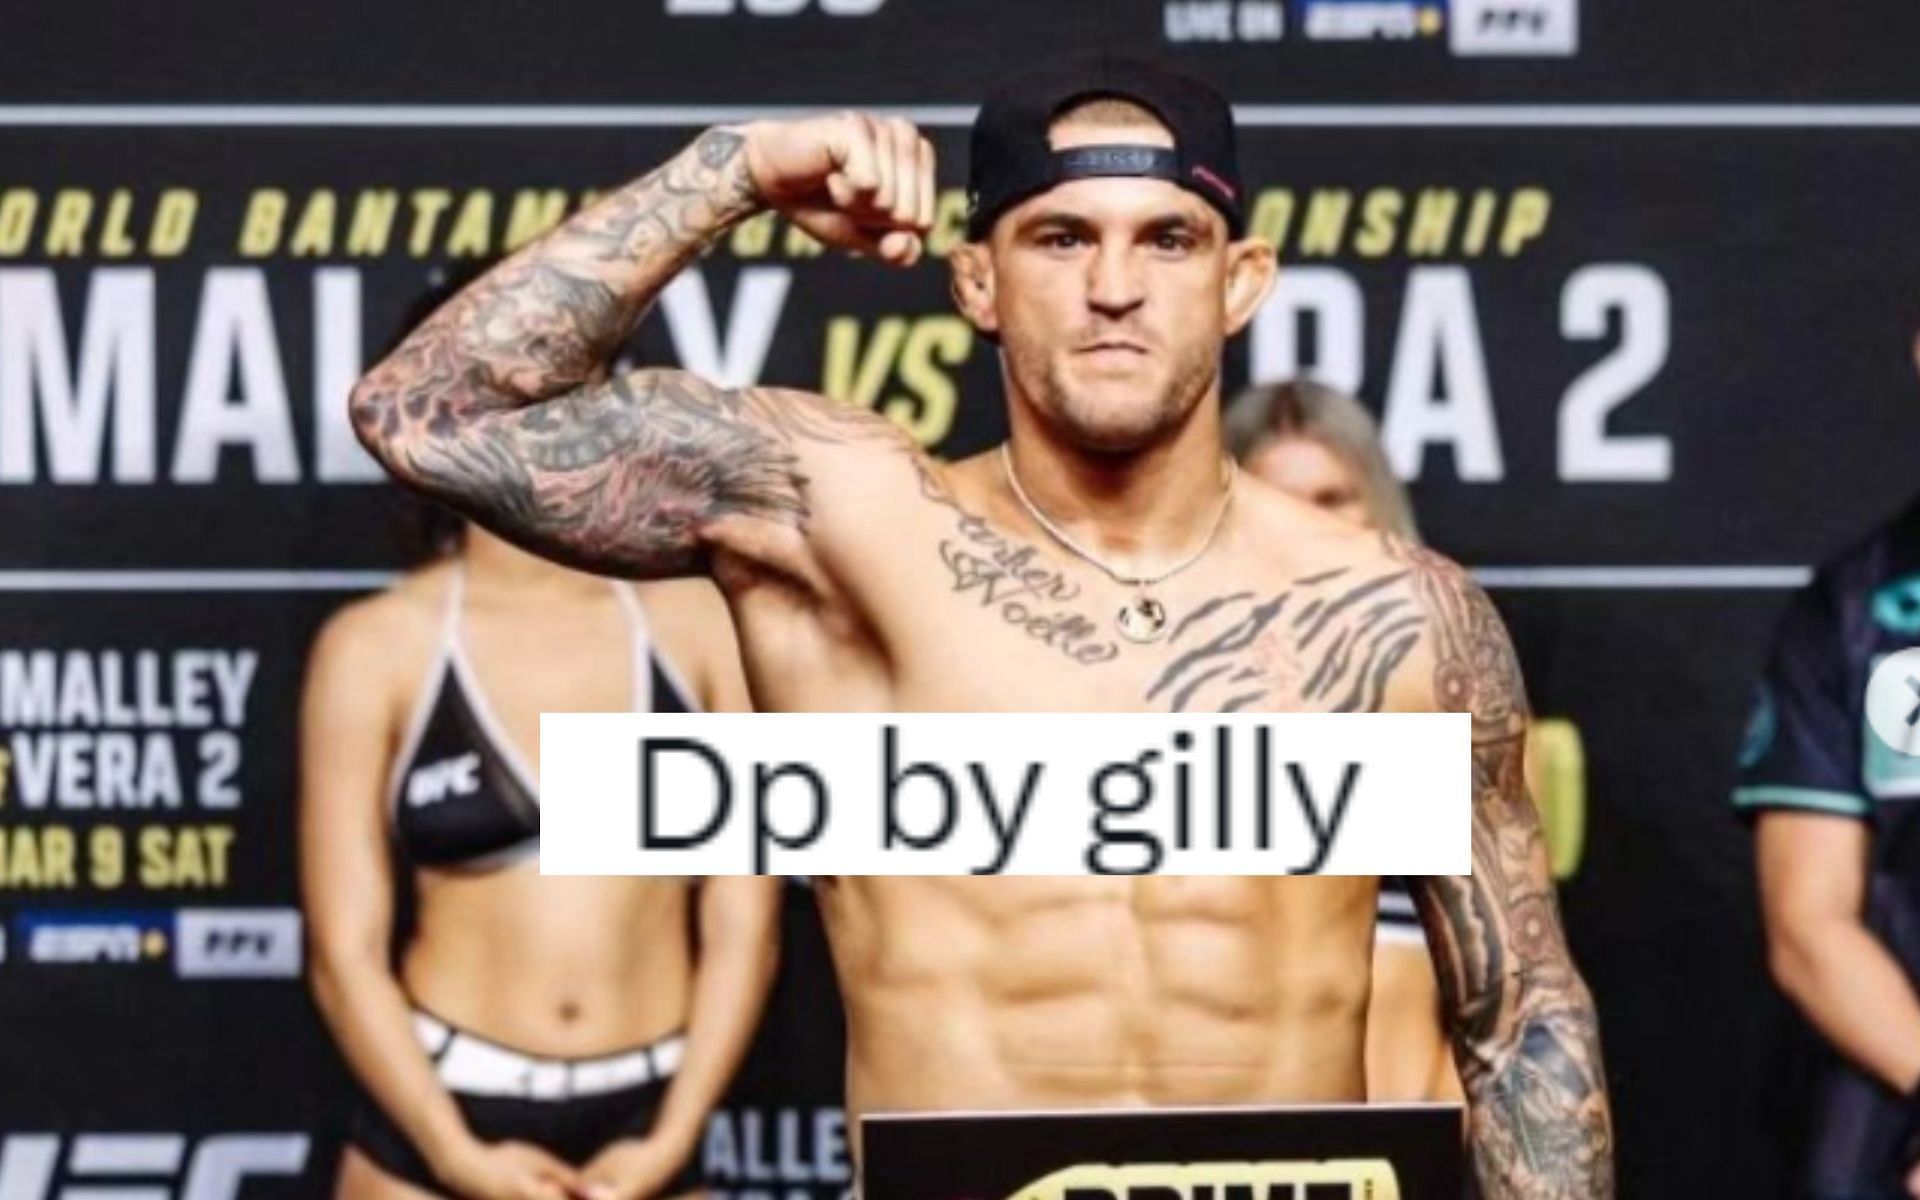 Dustin Poirier is ready to fight for UFC gold. [Image via @dustinpoirier on Instagram]